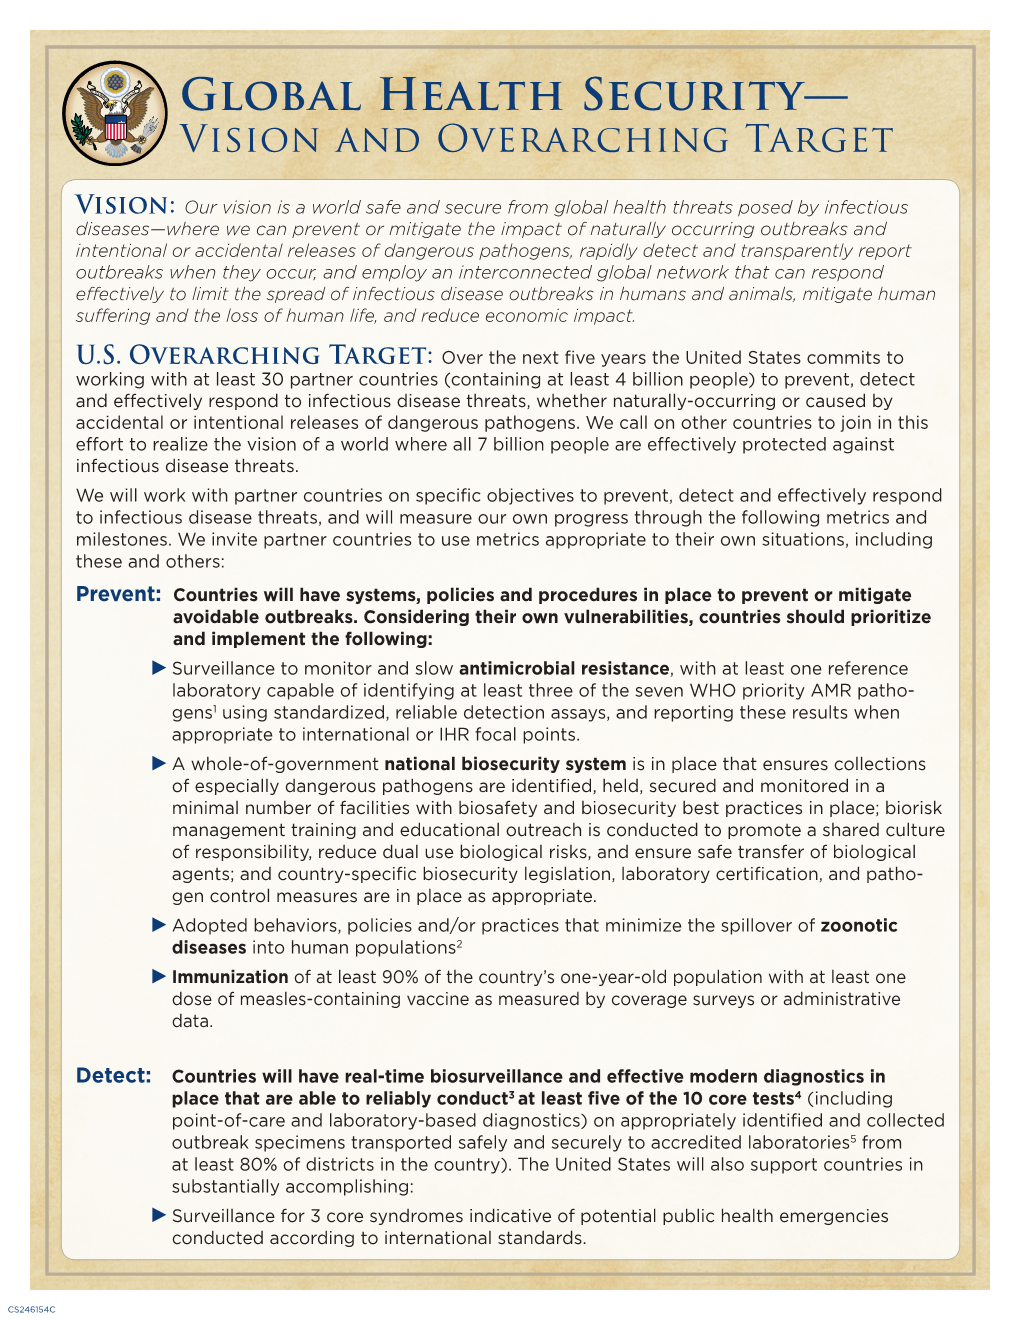 Global Health Security: Vision and Overarching Target